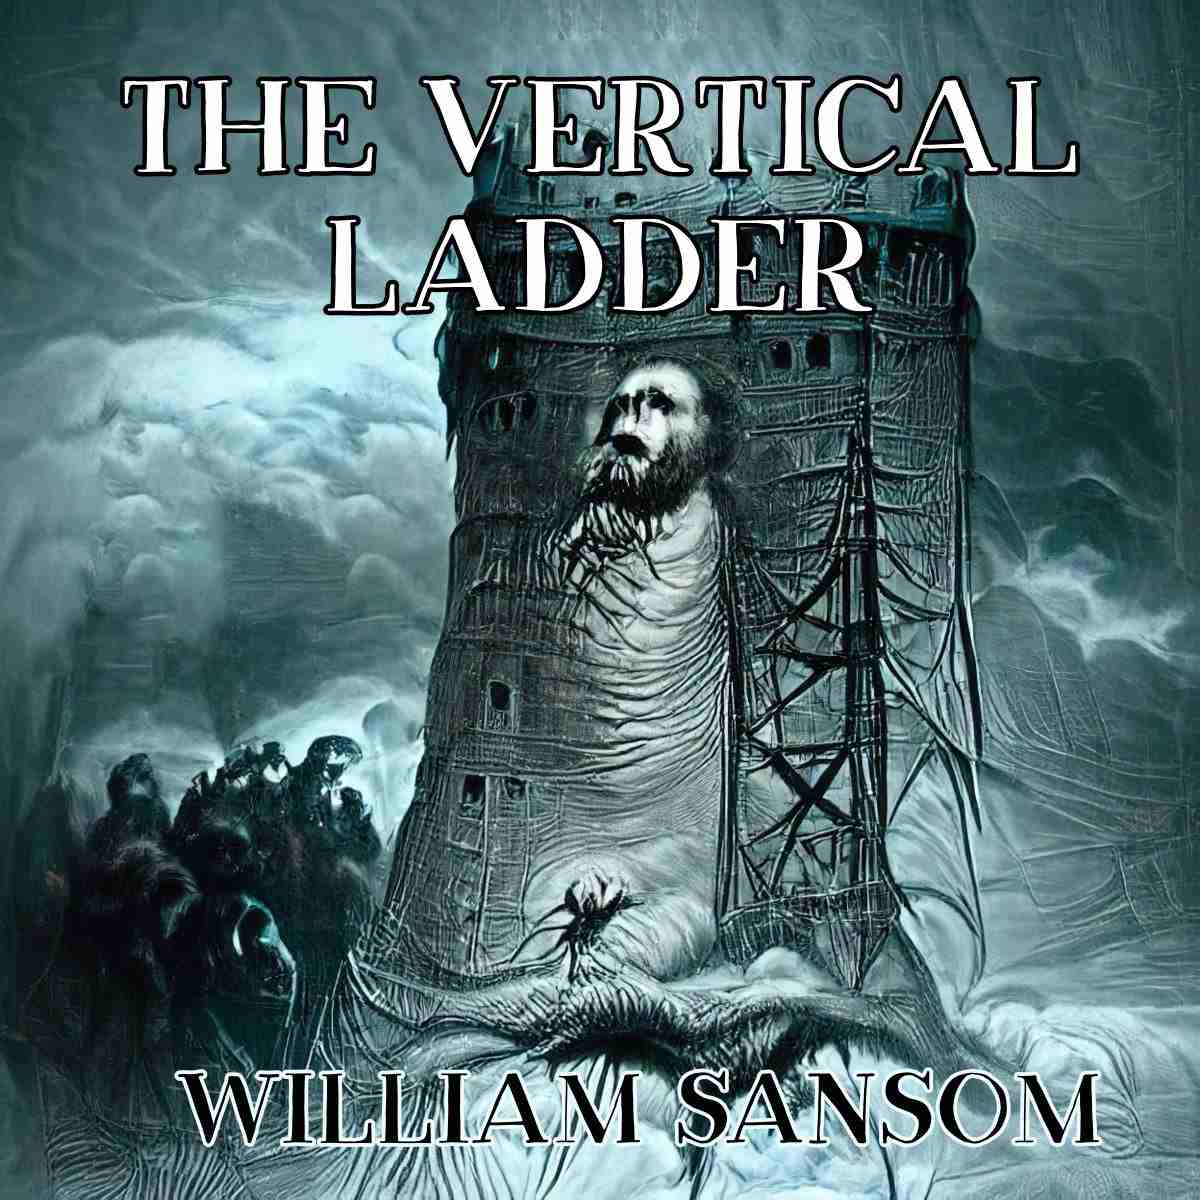 The Vertical Ladder by William Sansom Short Story Analysis